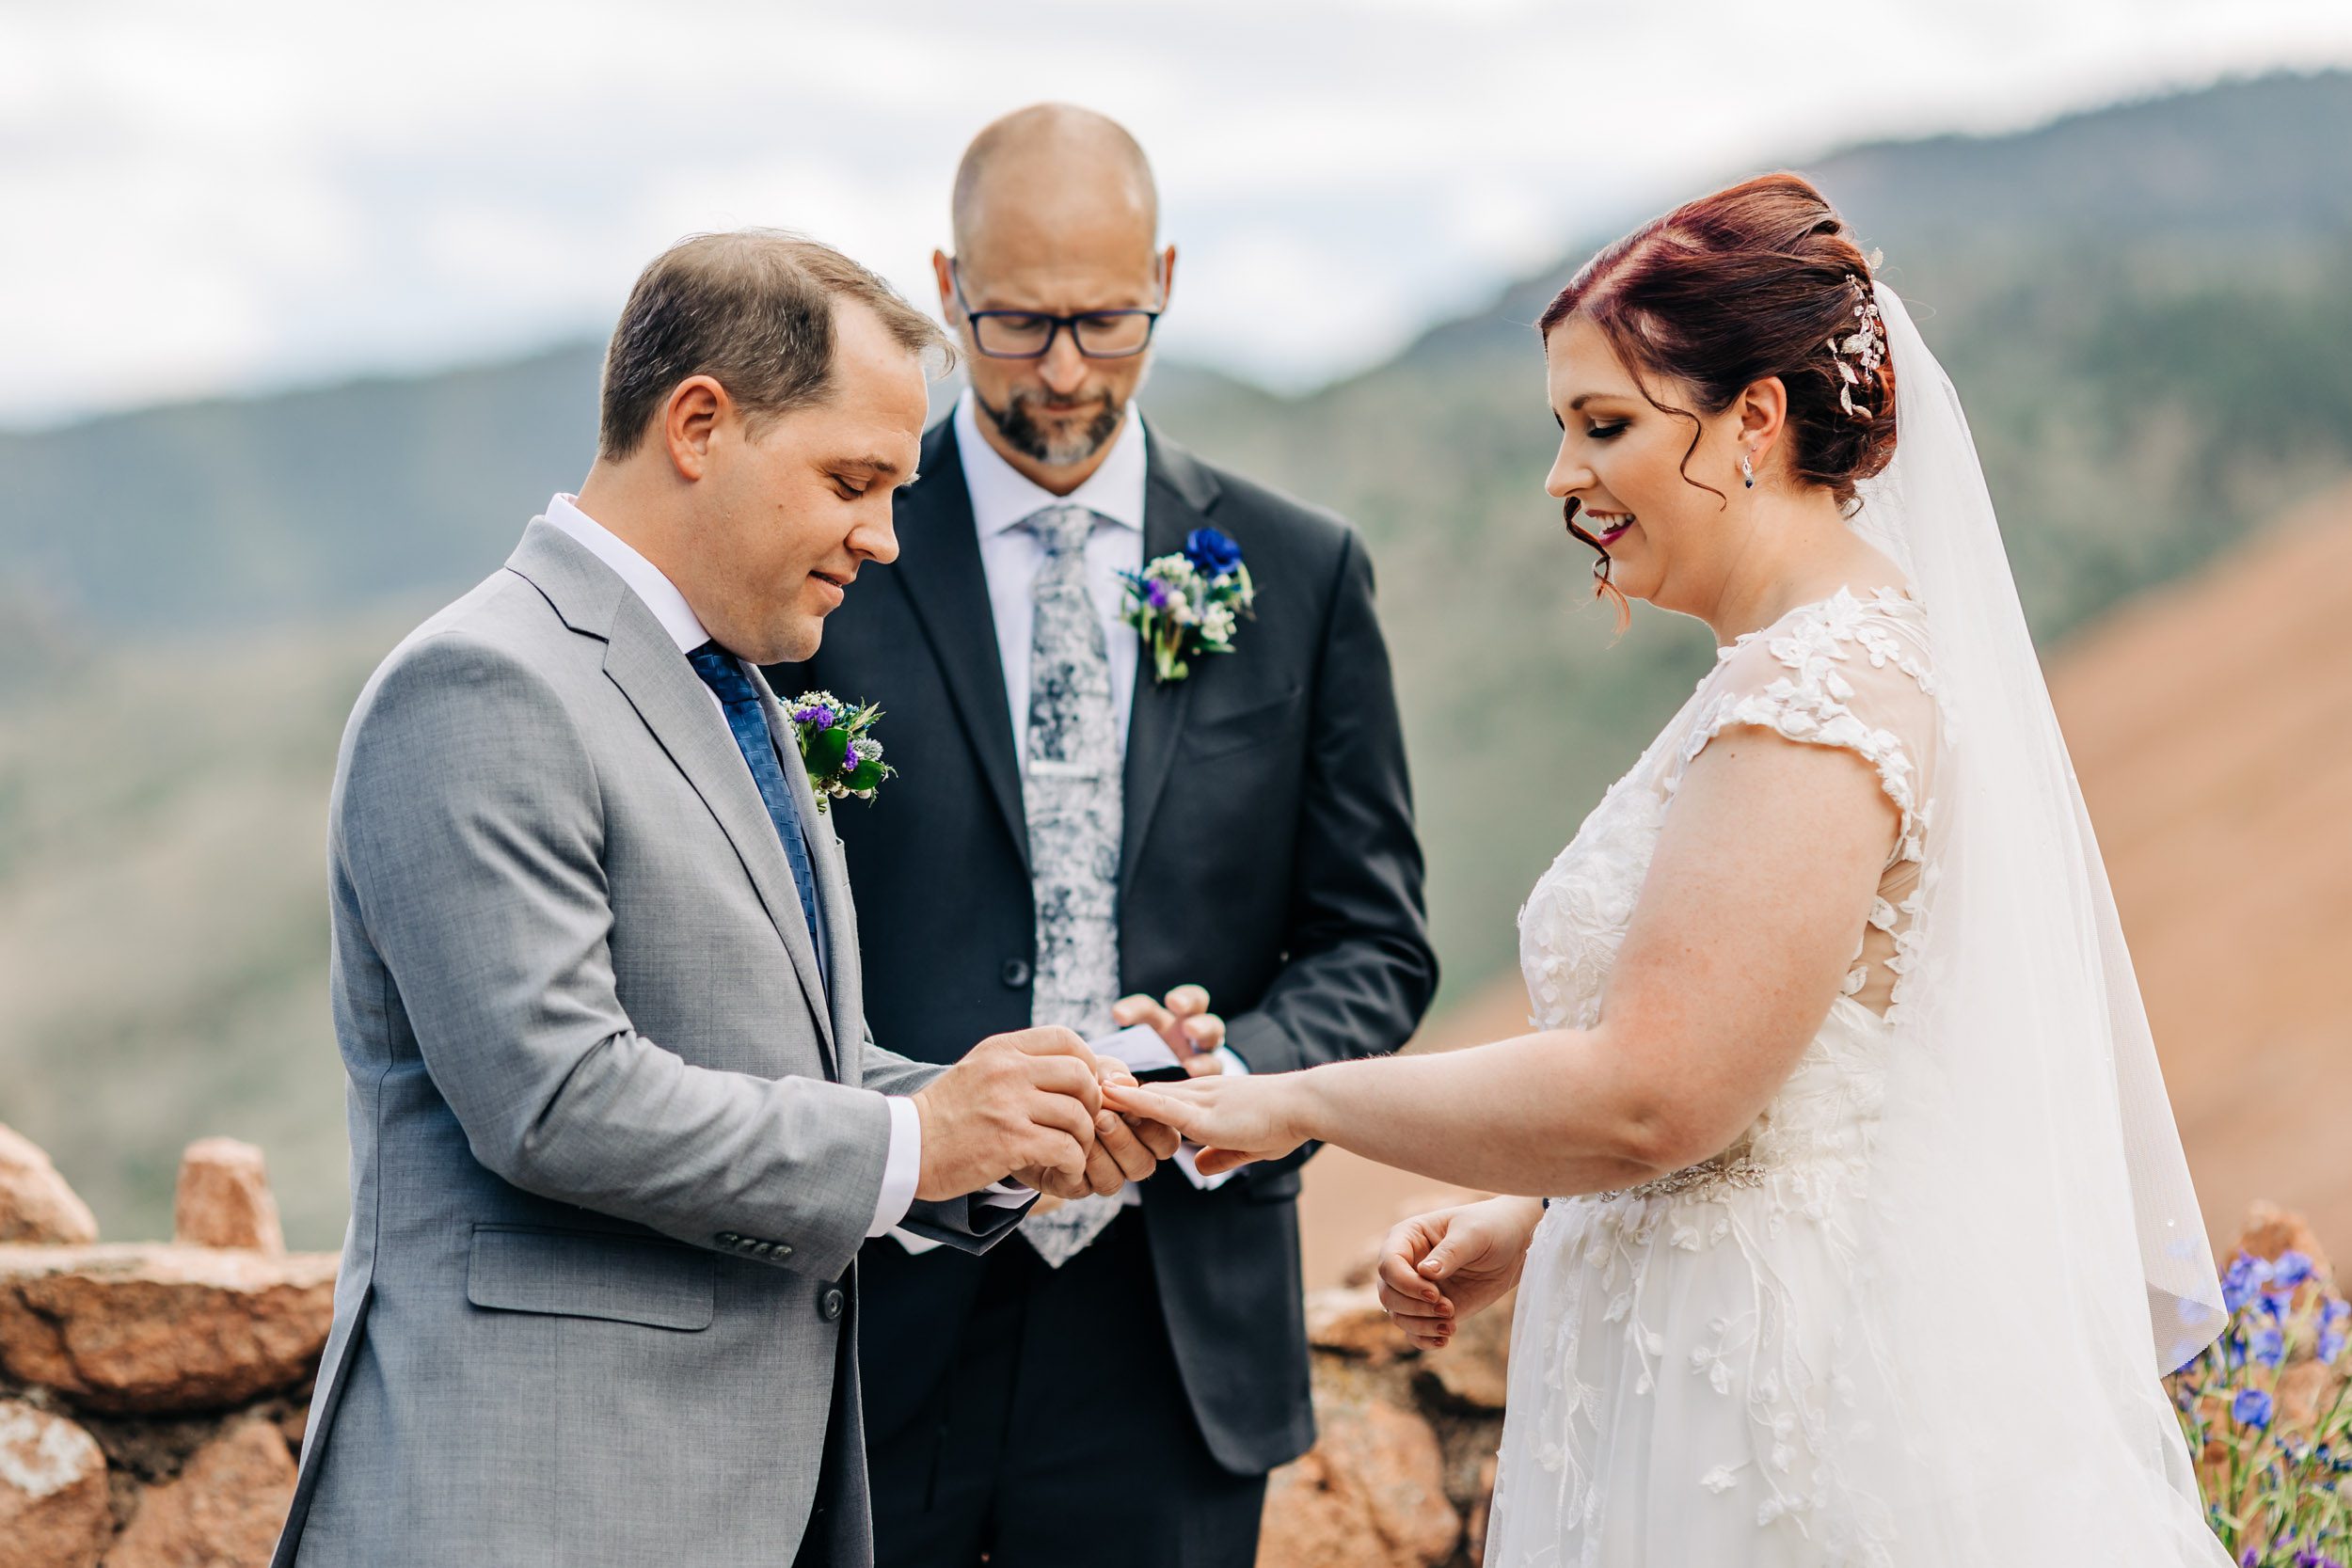 exchanging rings at red rocks trading post wedding ceremony